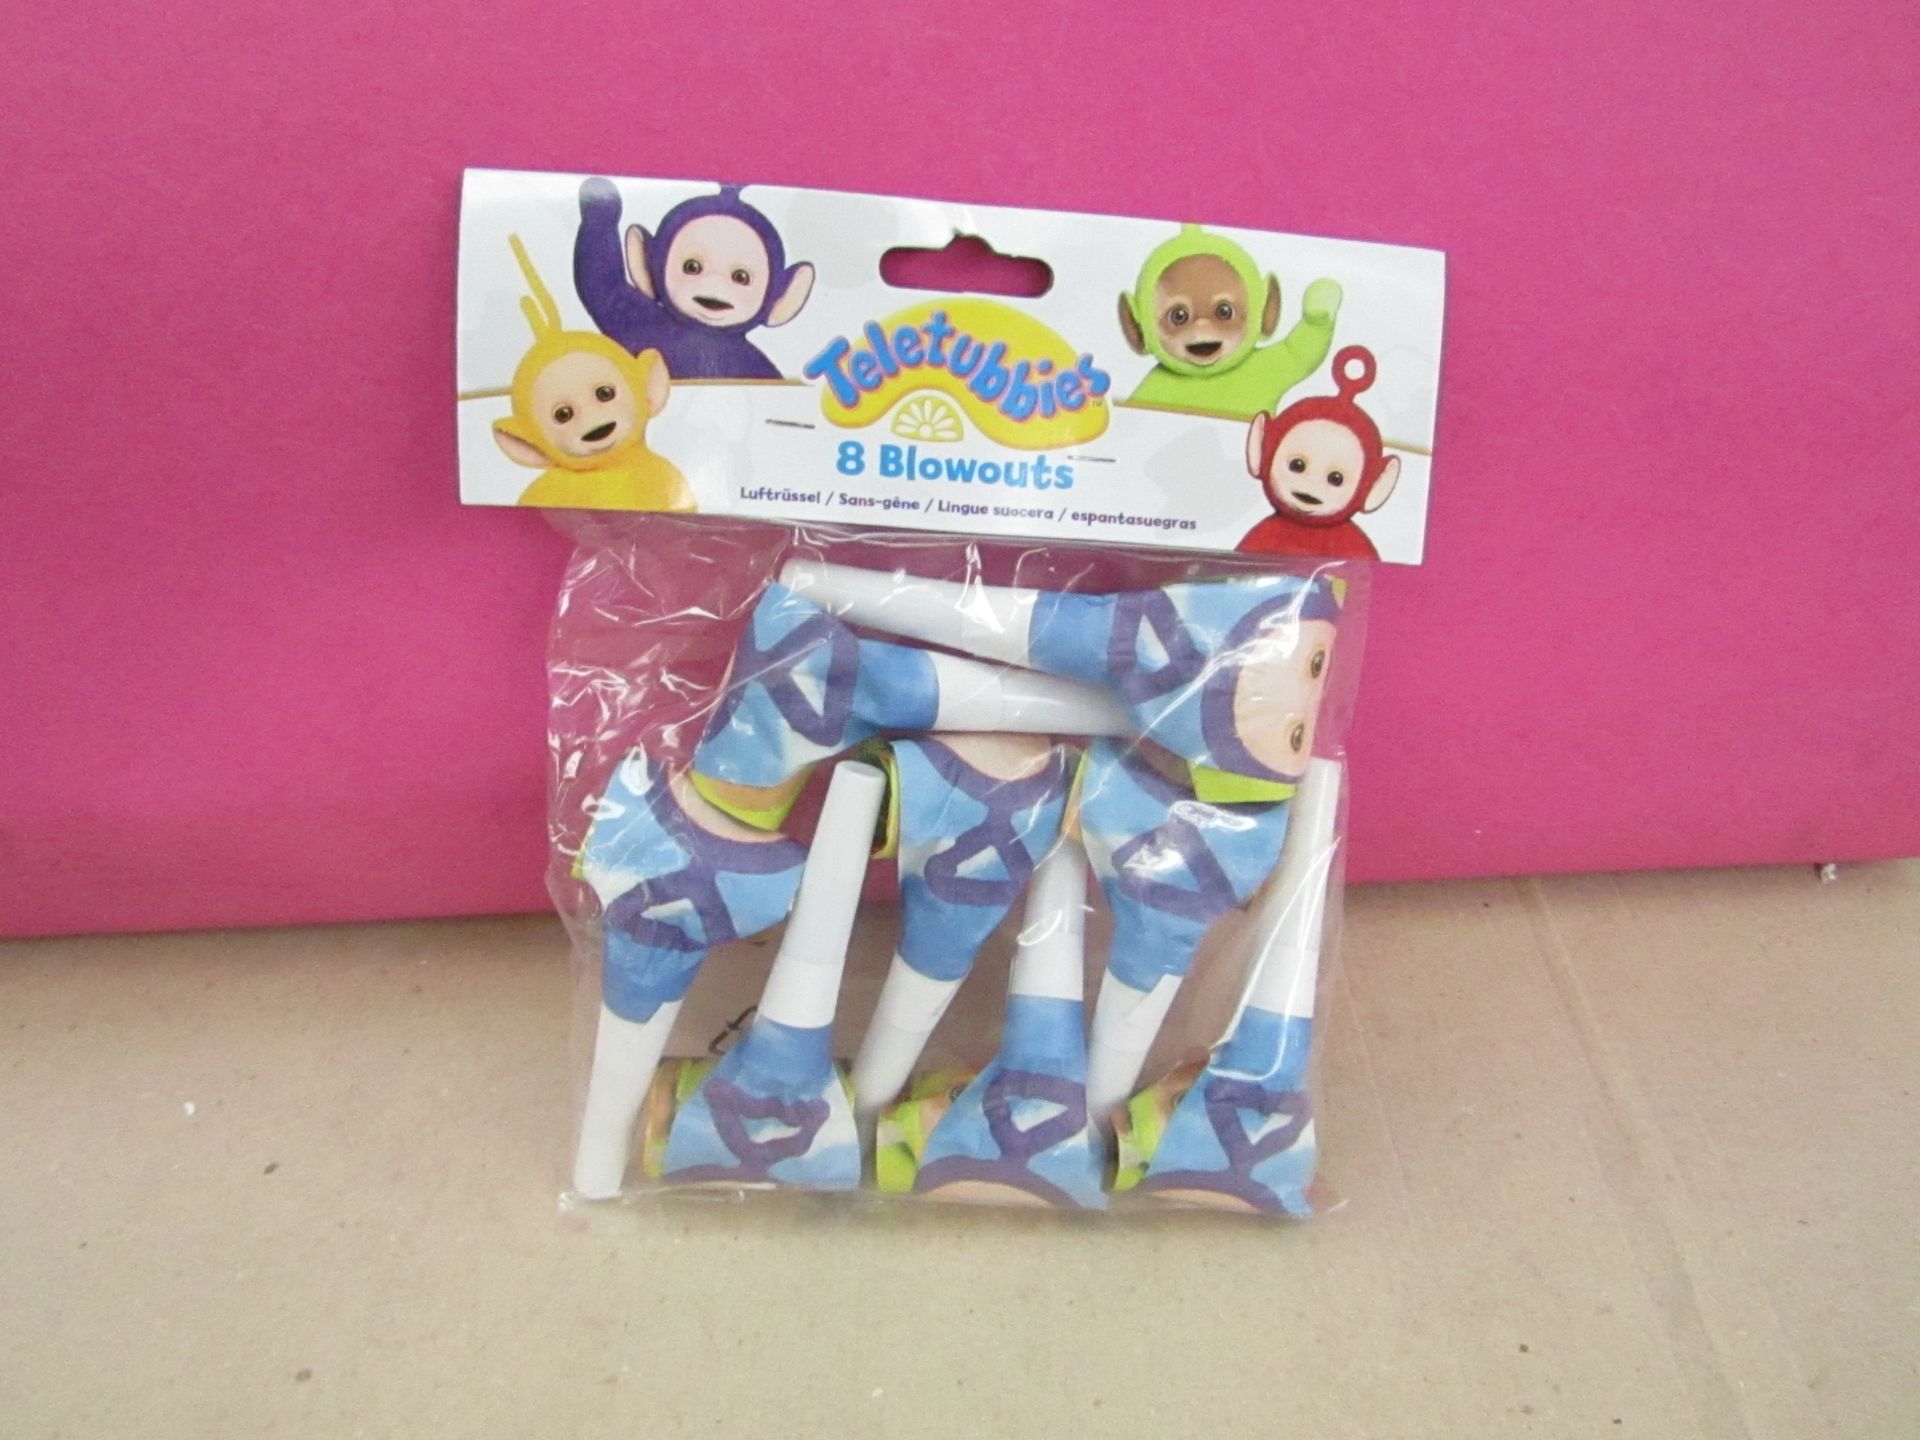 10x Teletubbies - 8 Party Blowers - New & Packaged.